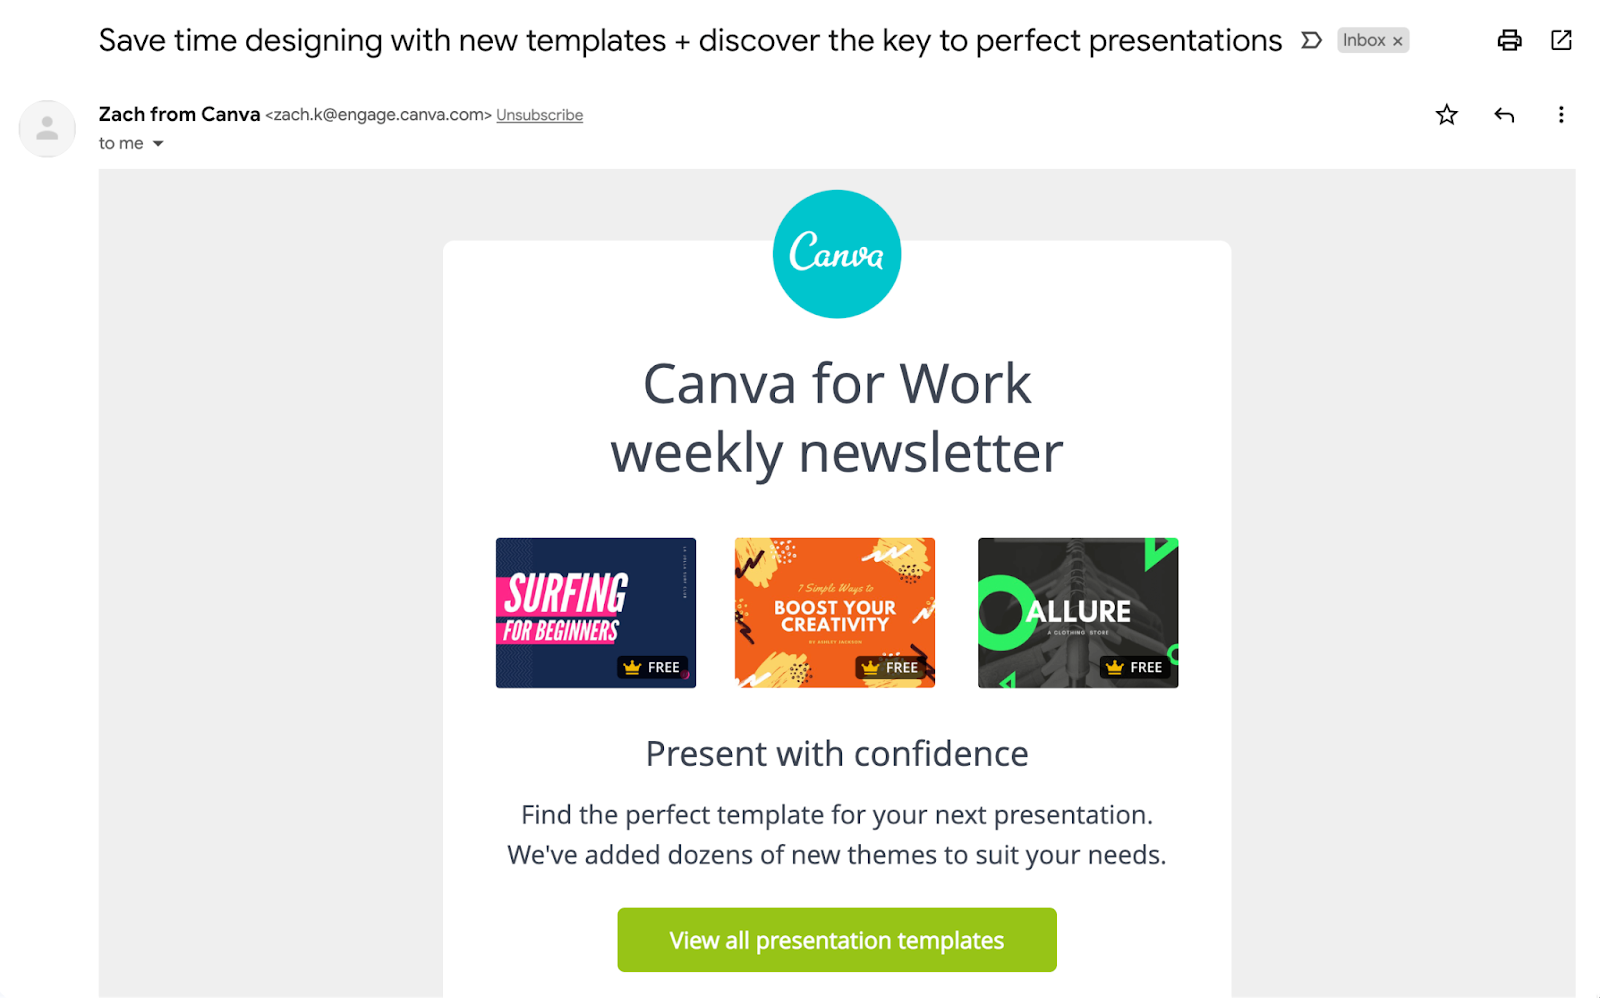 Example of a personalized newsletter from Canva on their presentations feature